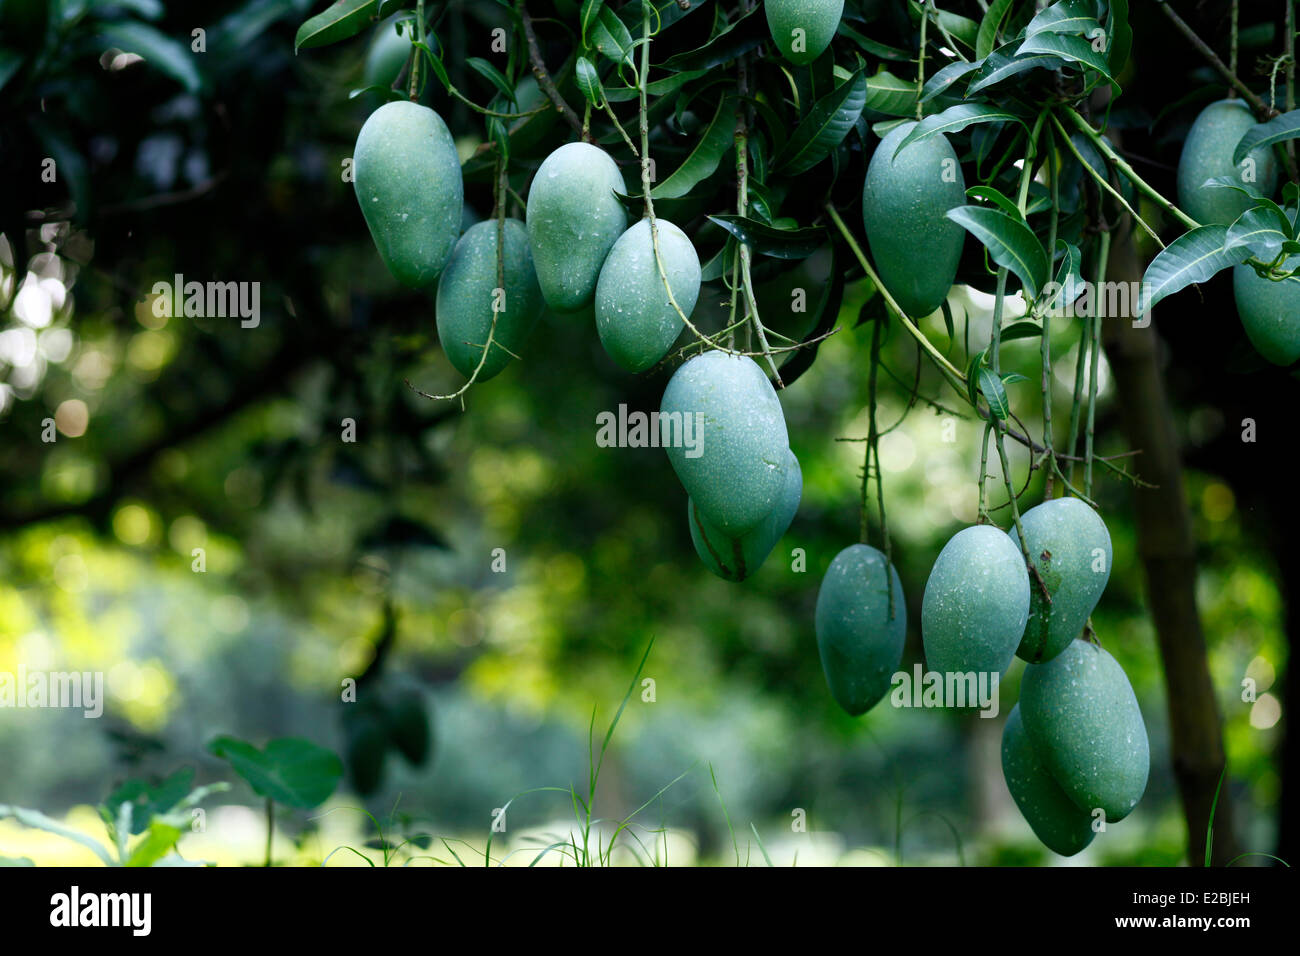 Mango garden Bangladesh generally produces about 800,000 metric tons of mangoes on 51,000 hectors of land. Chapainawabganj alone produces almost 200,000 tons of mangoes on 23,282 hectares of land. Stock Photo